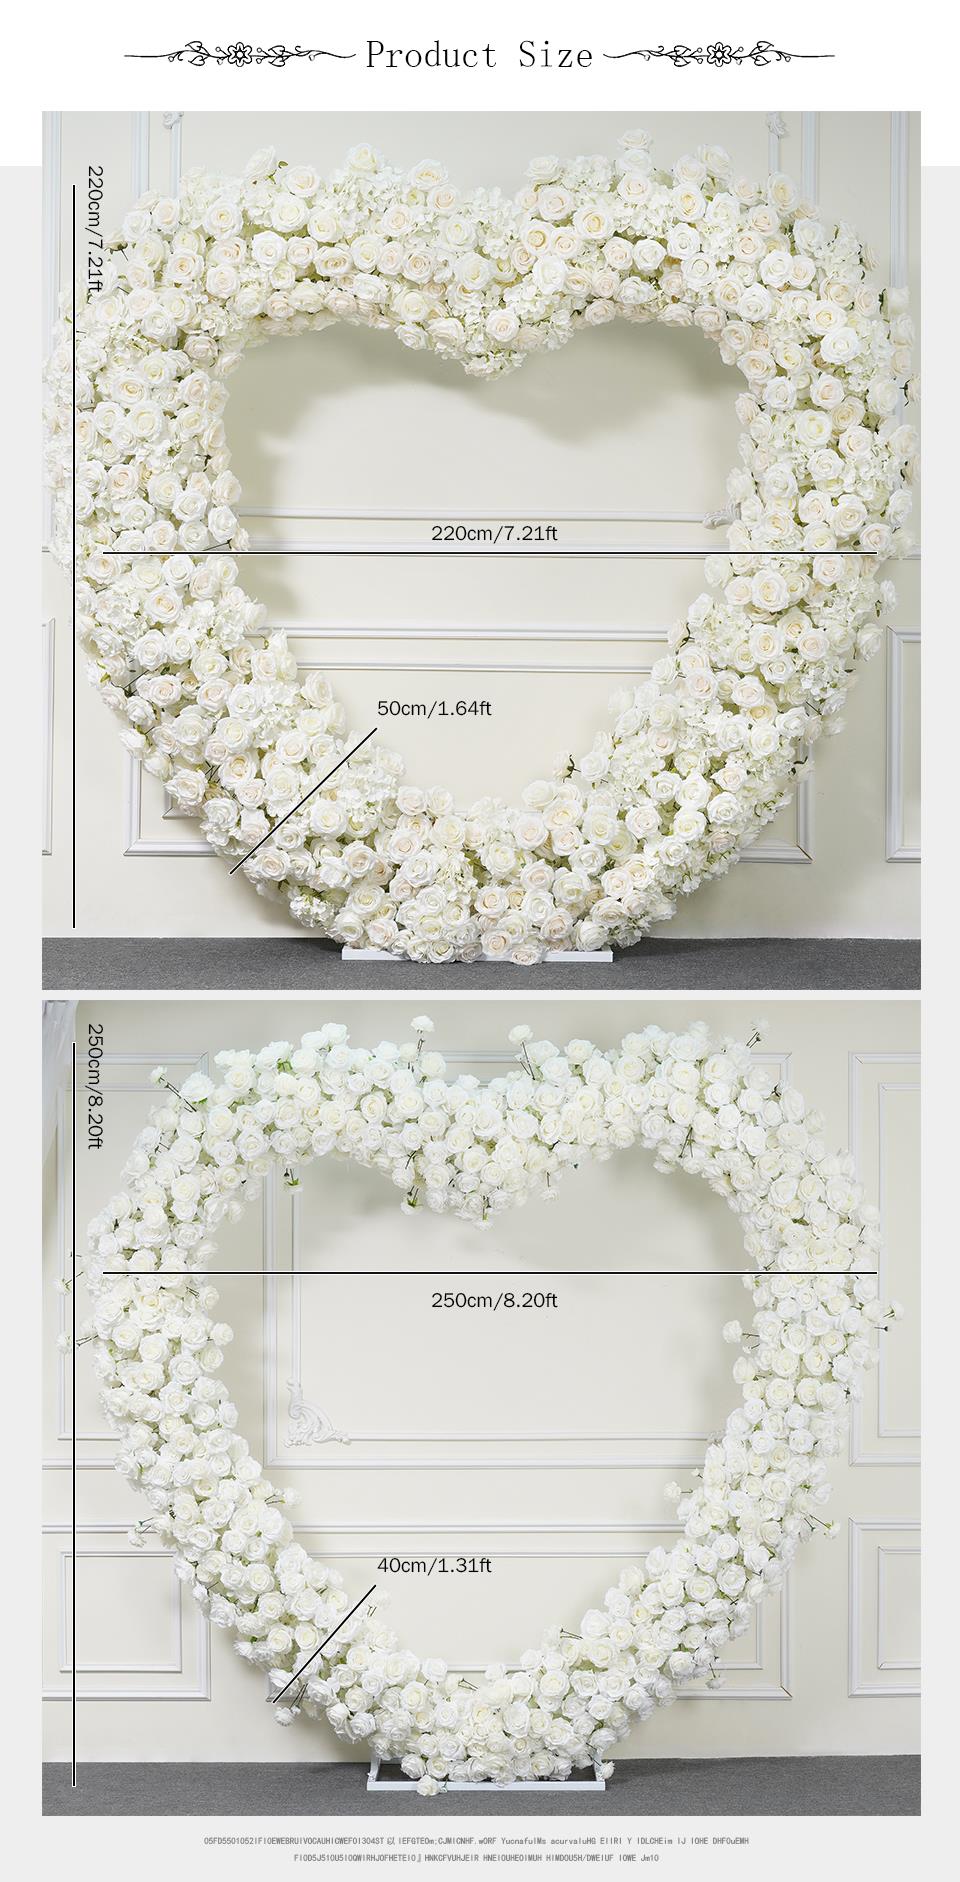 Techniques for arranging flowers securely on a casket